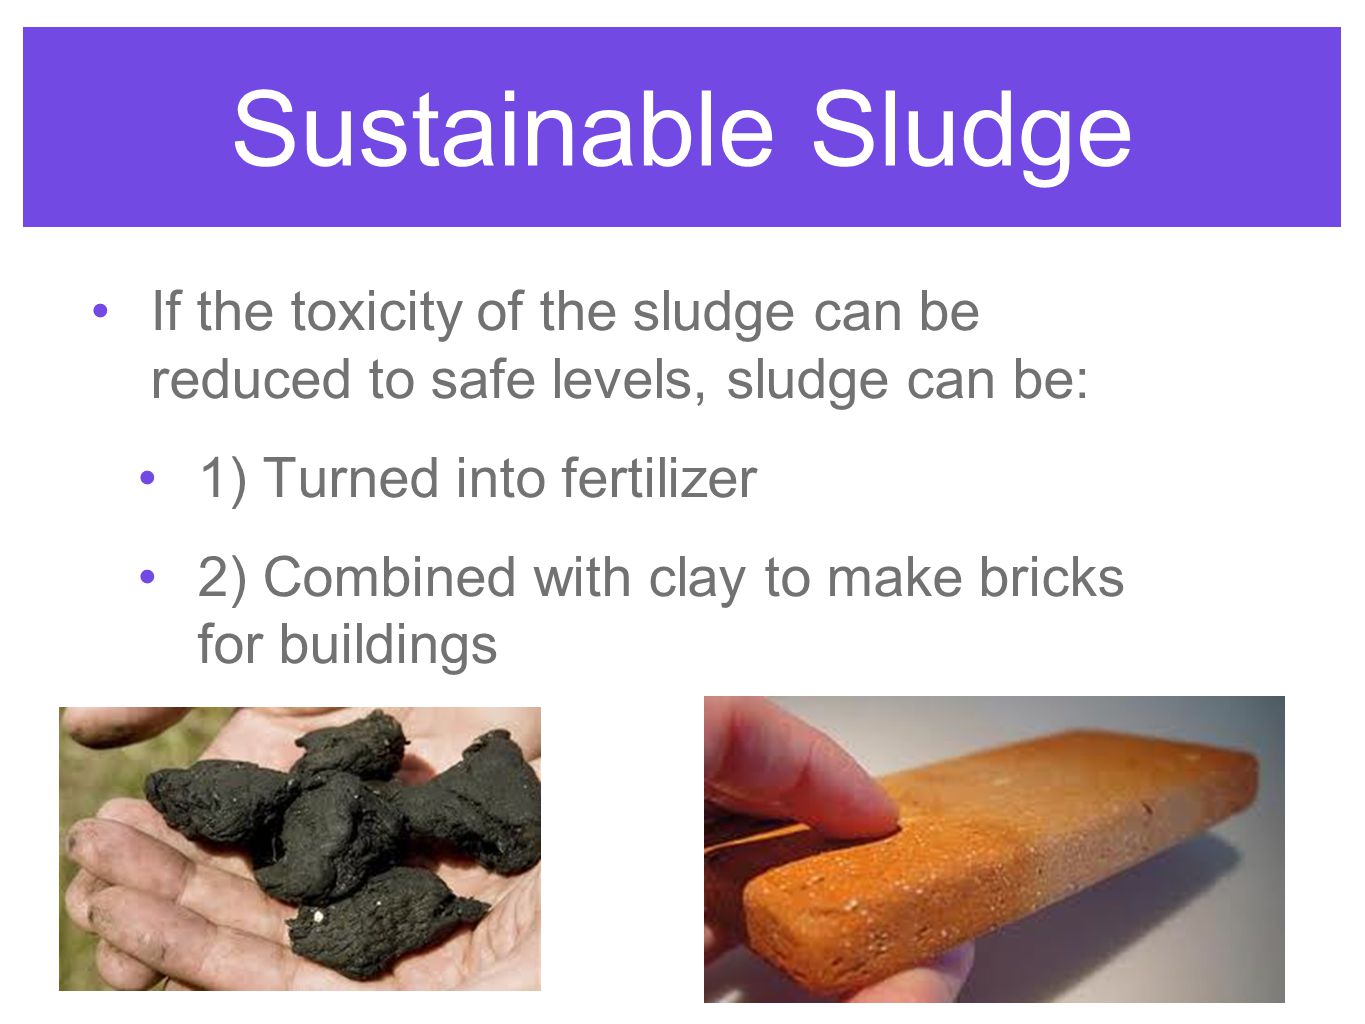 Sustainable Sludge If the toxicity of the sludge can be reduced to safe levels, sludge can be: 1) Turned into fertilizer.